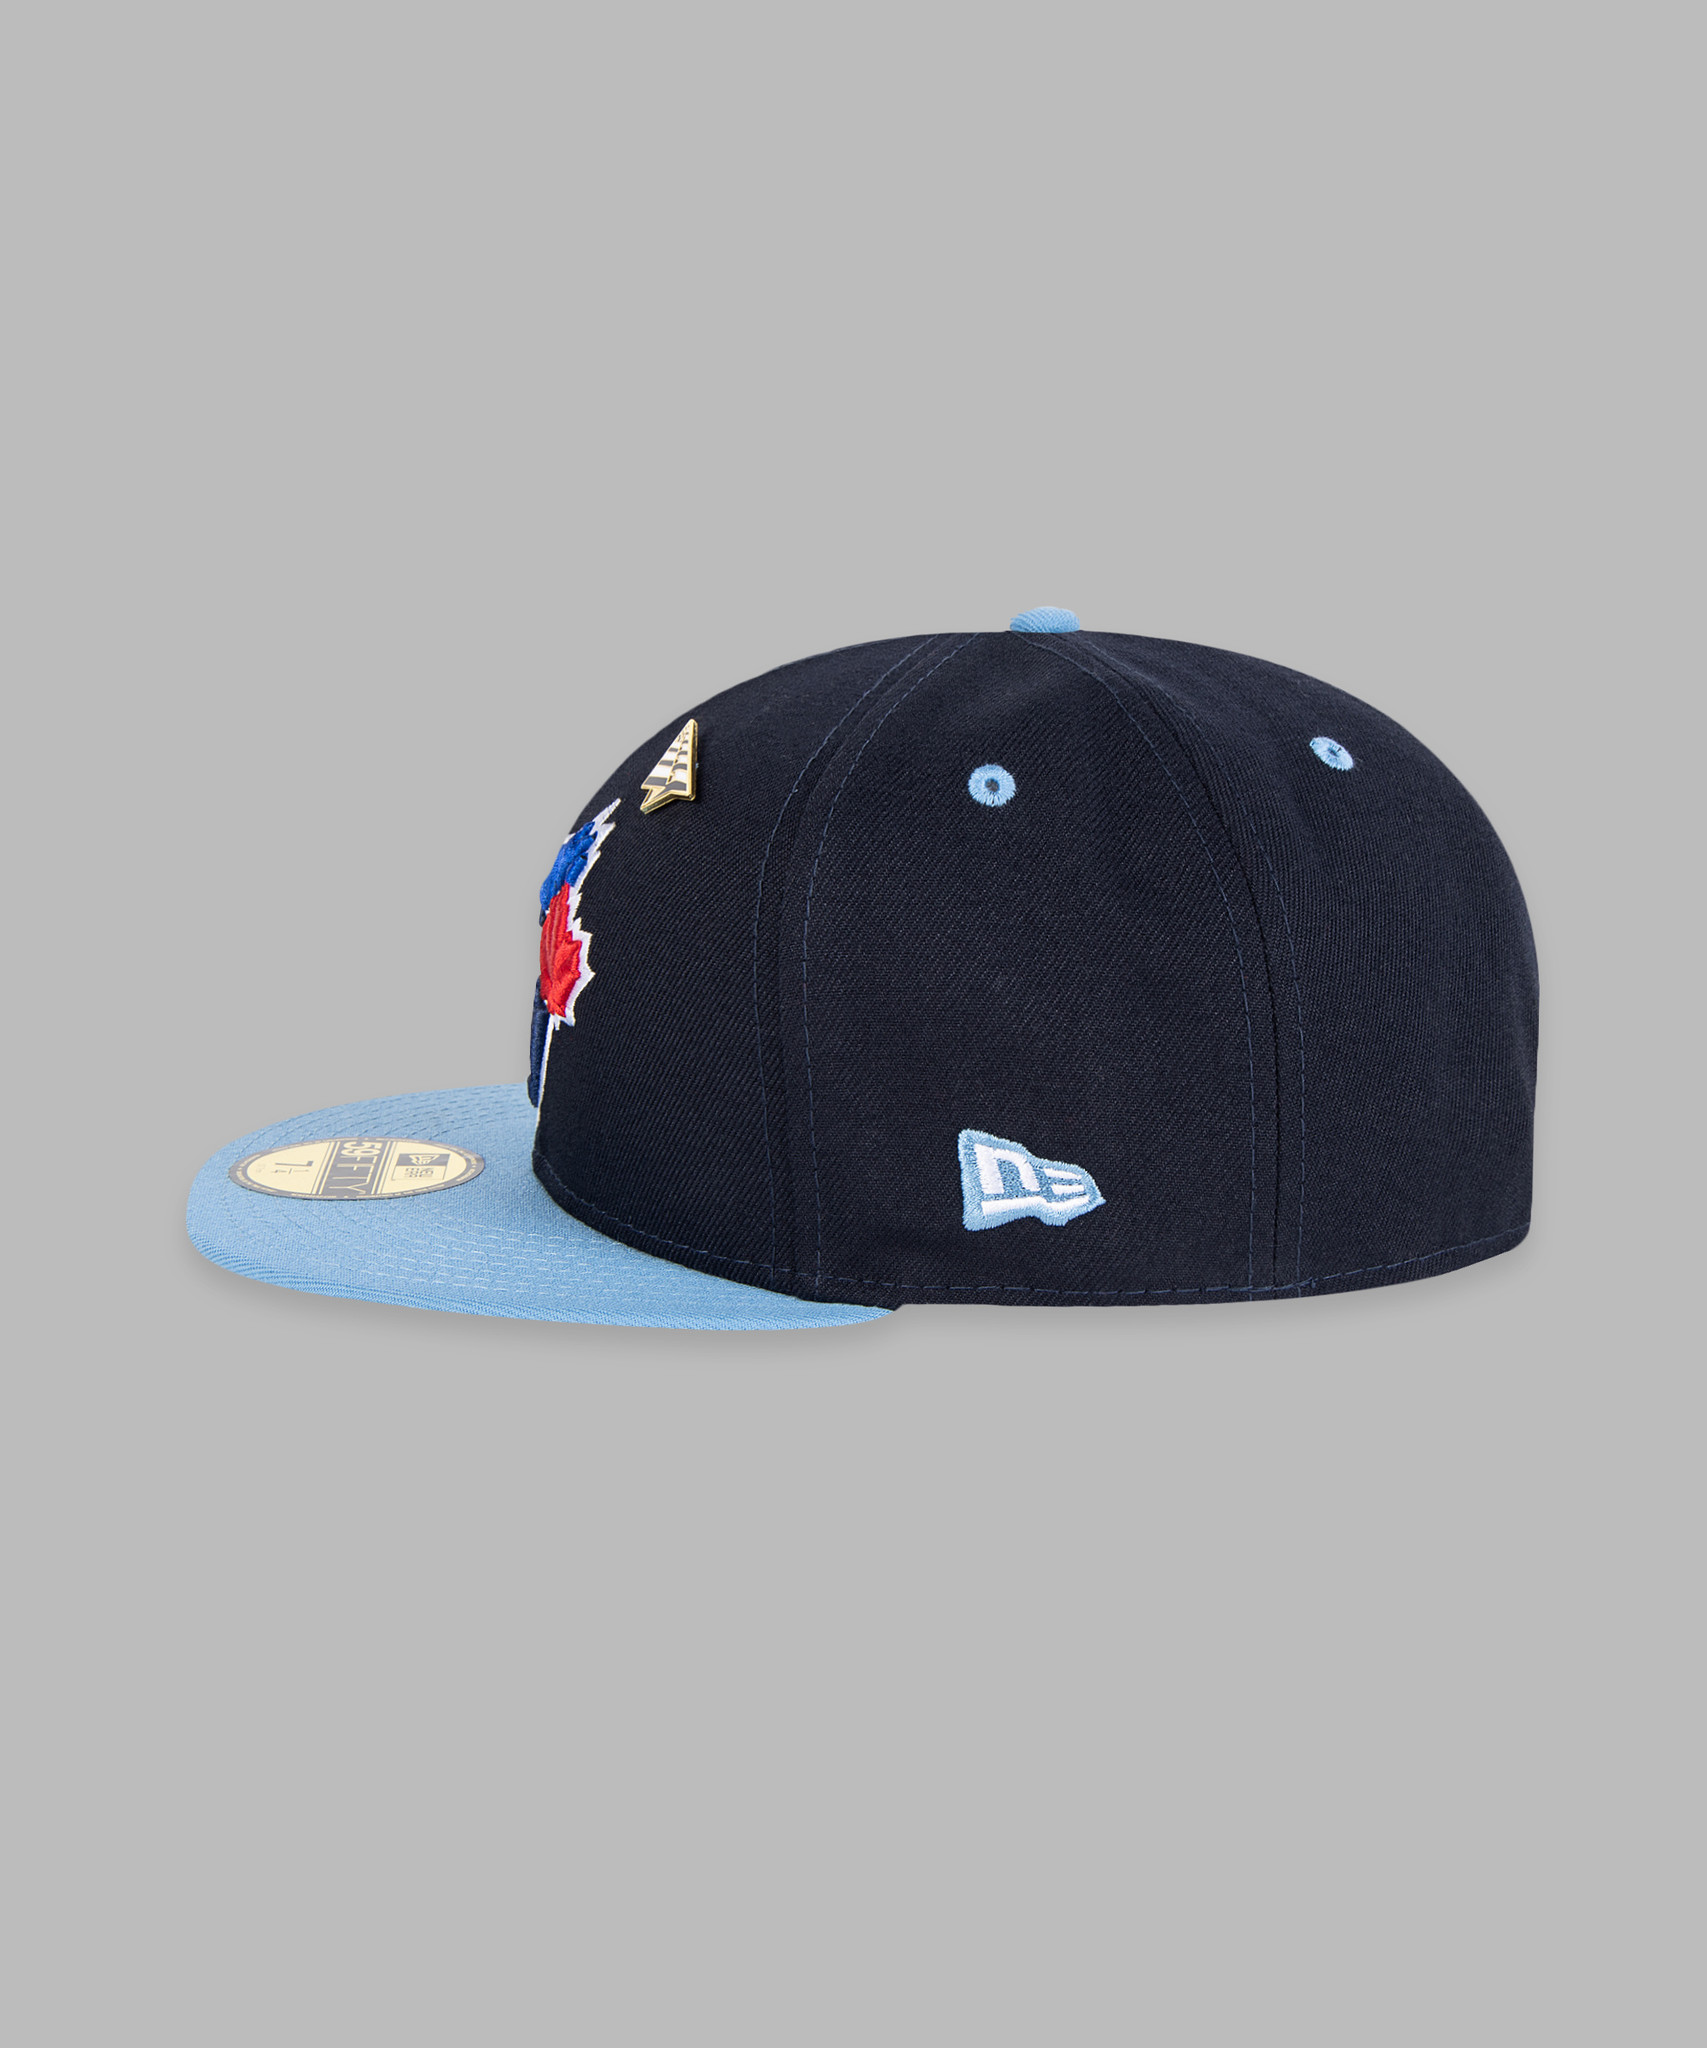 Official New Era New York Yankees MLB x Paper Planes White 59FIFTY